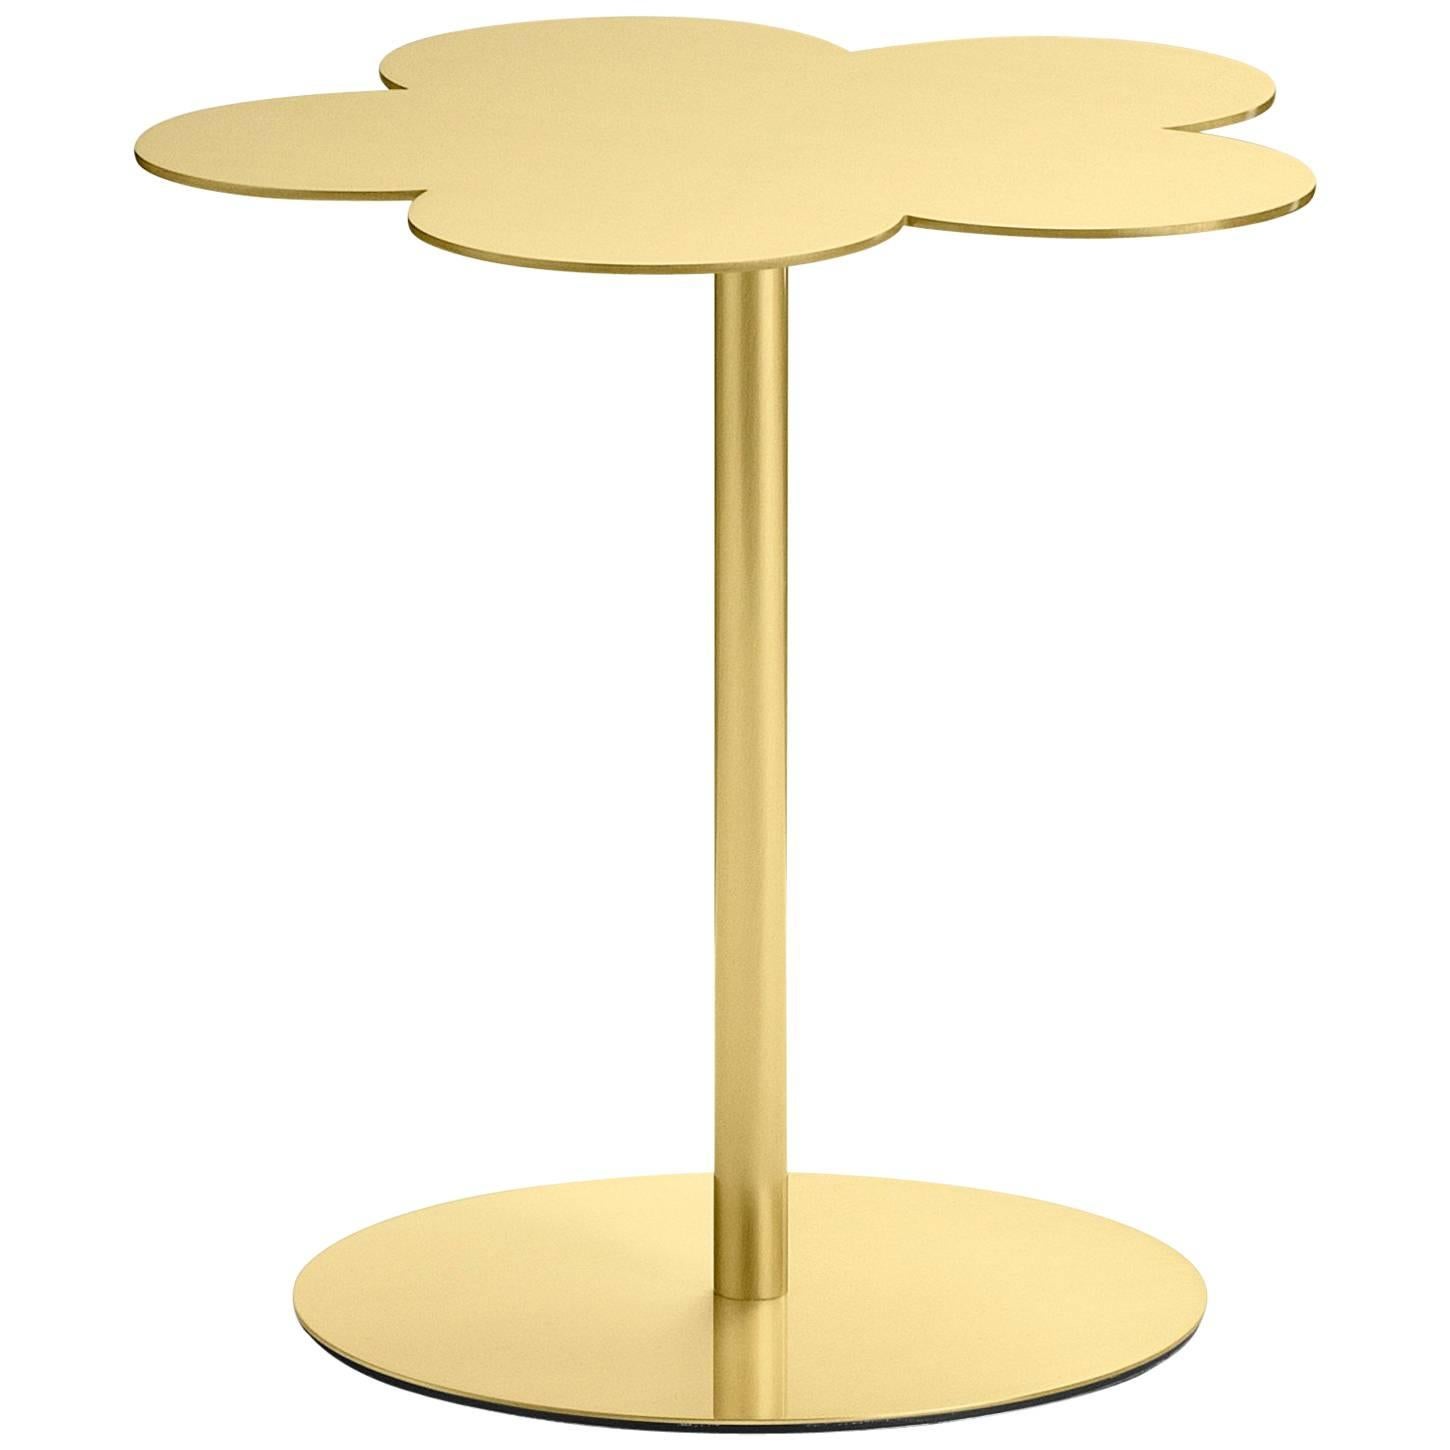 Ghidini 1961 Flowers Small Side Coffee Table in Satin Brass Finish